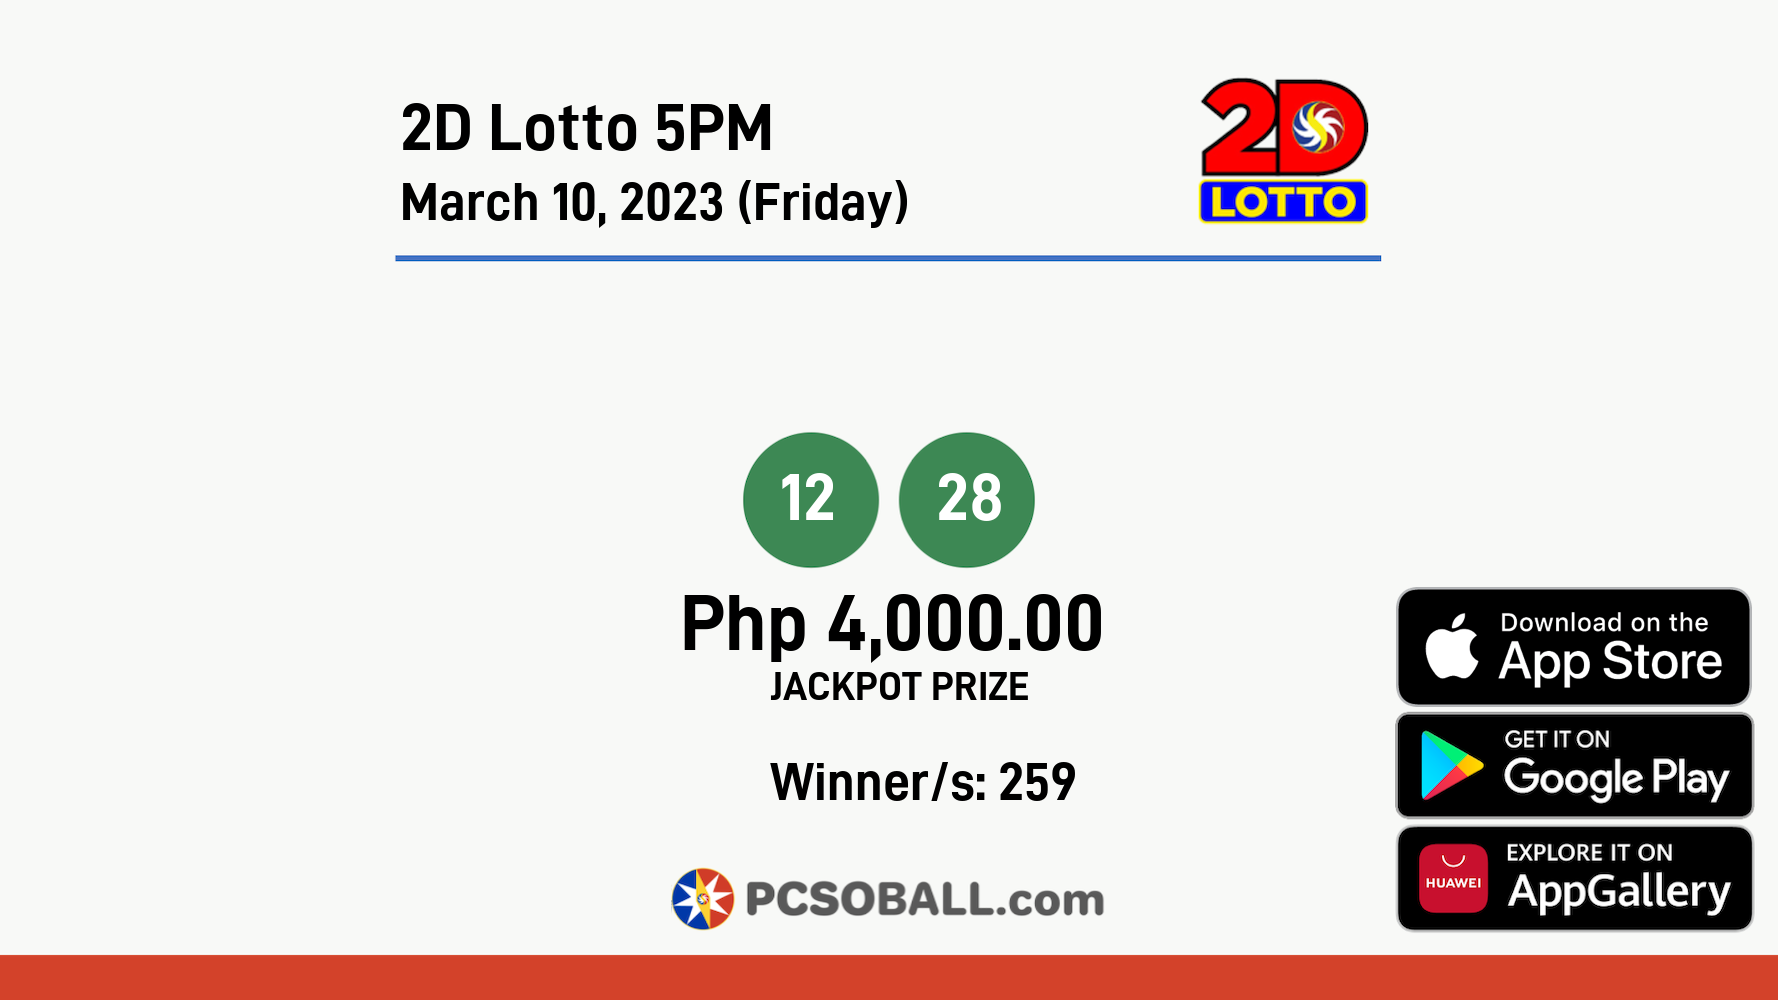 2D Lotto 5PM March 10, 2023 (Friday) Result